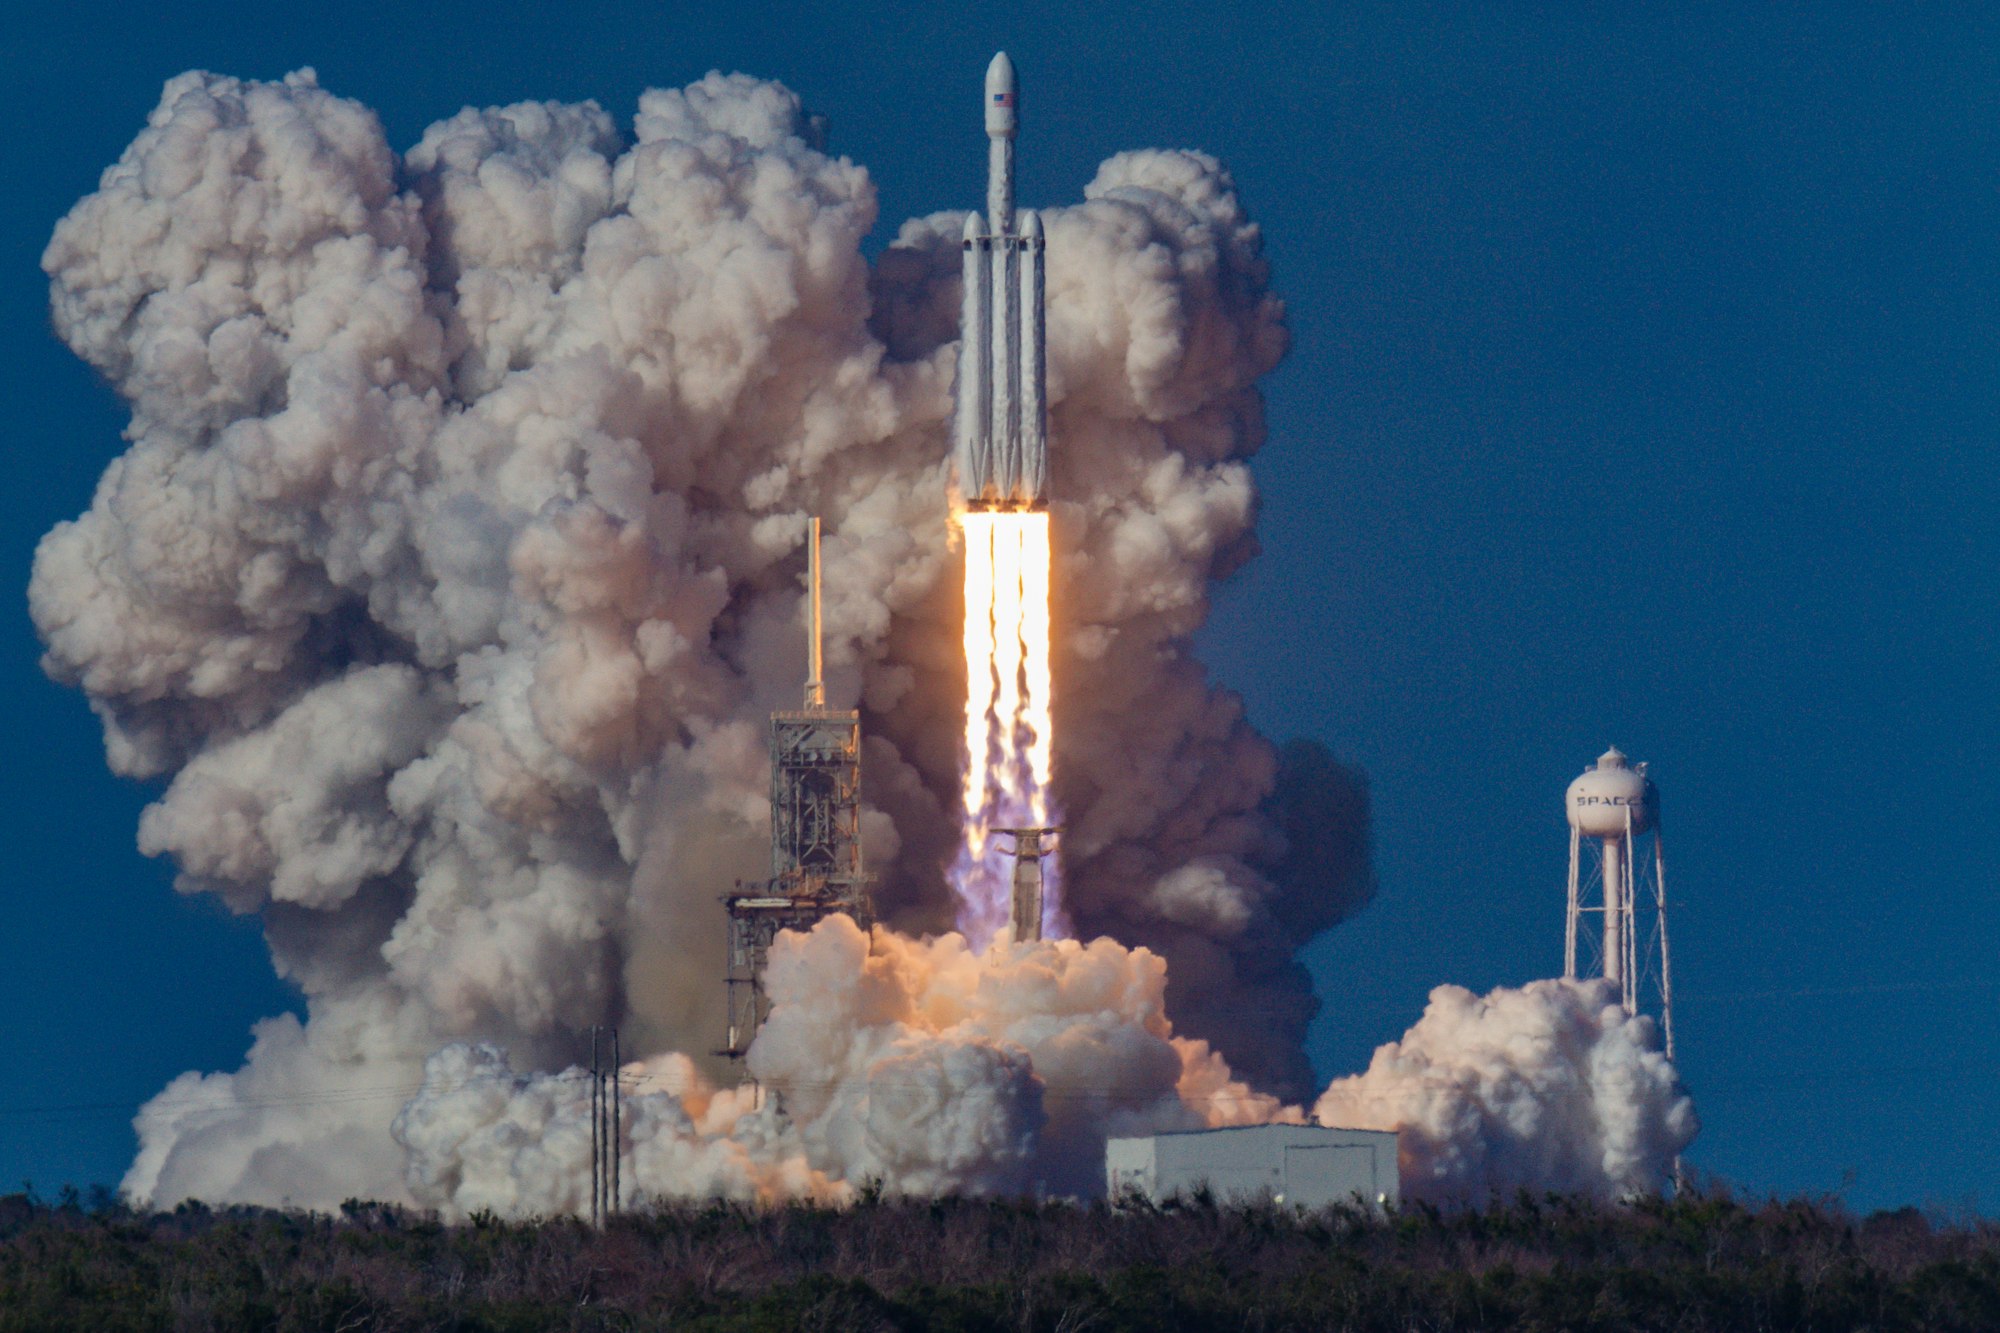 The first launch of the SpaceX Falcon Heavy rocket.